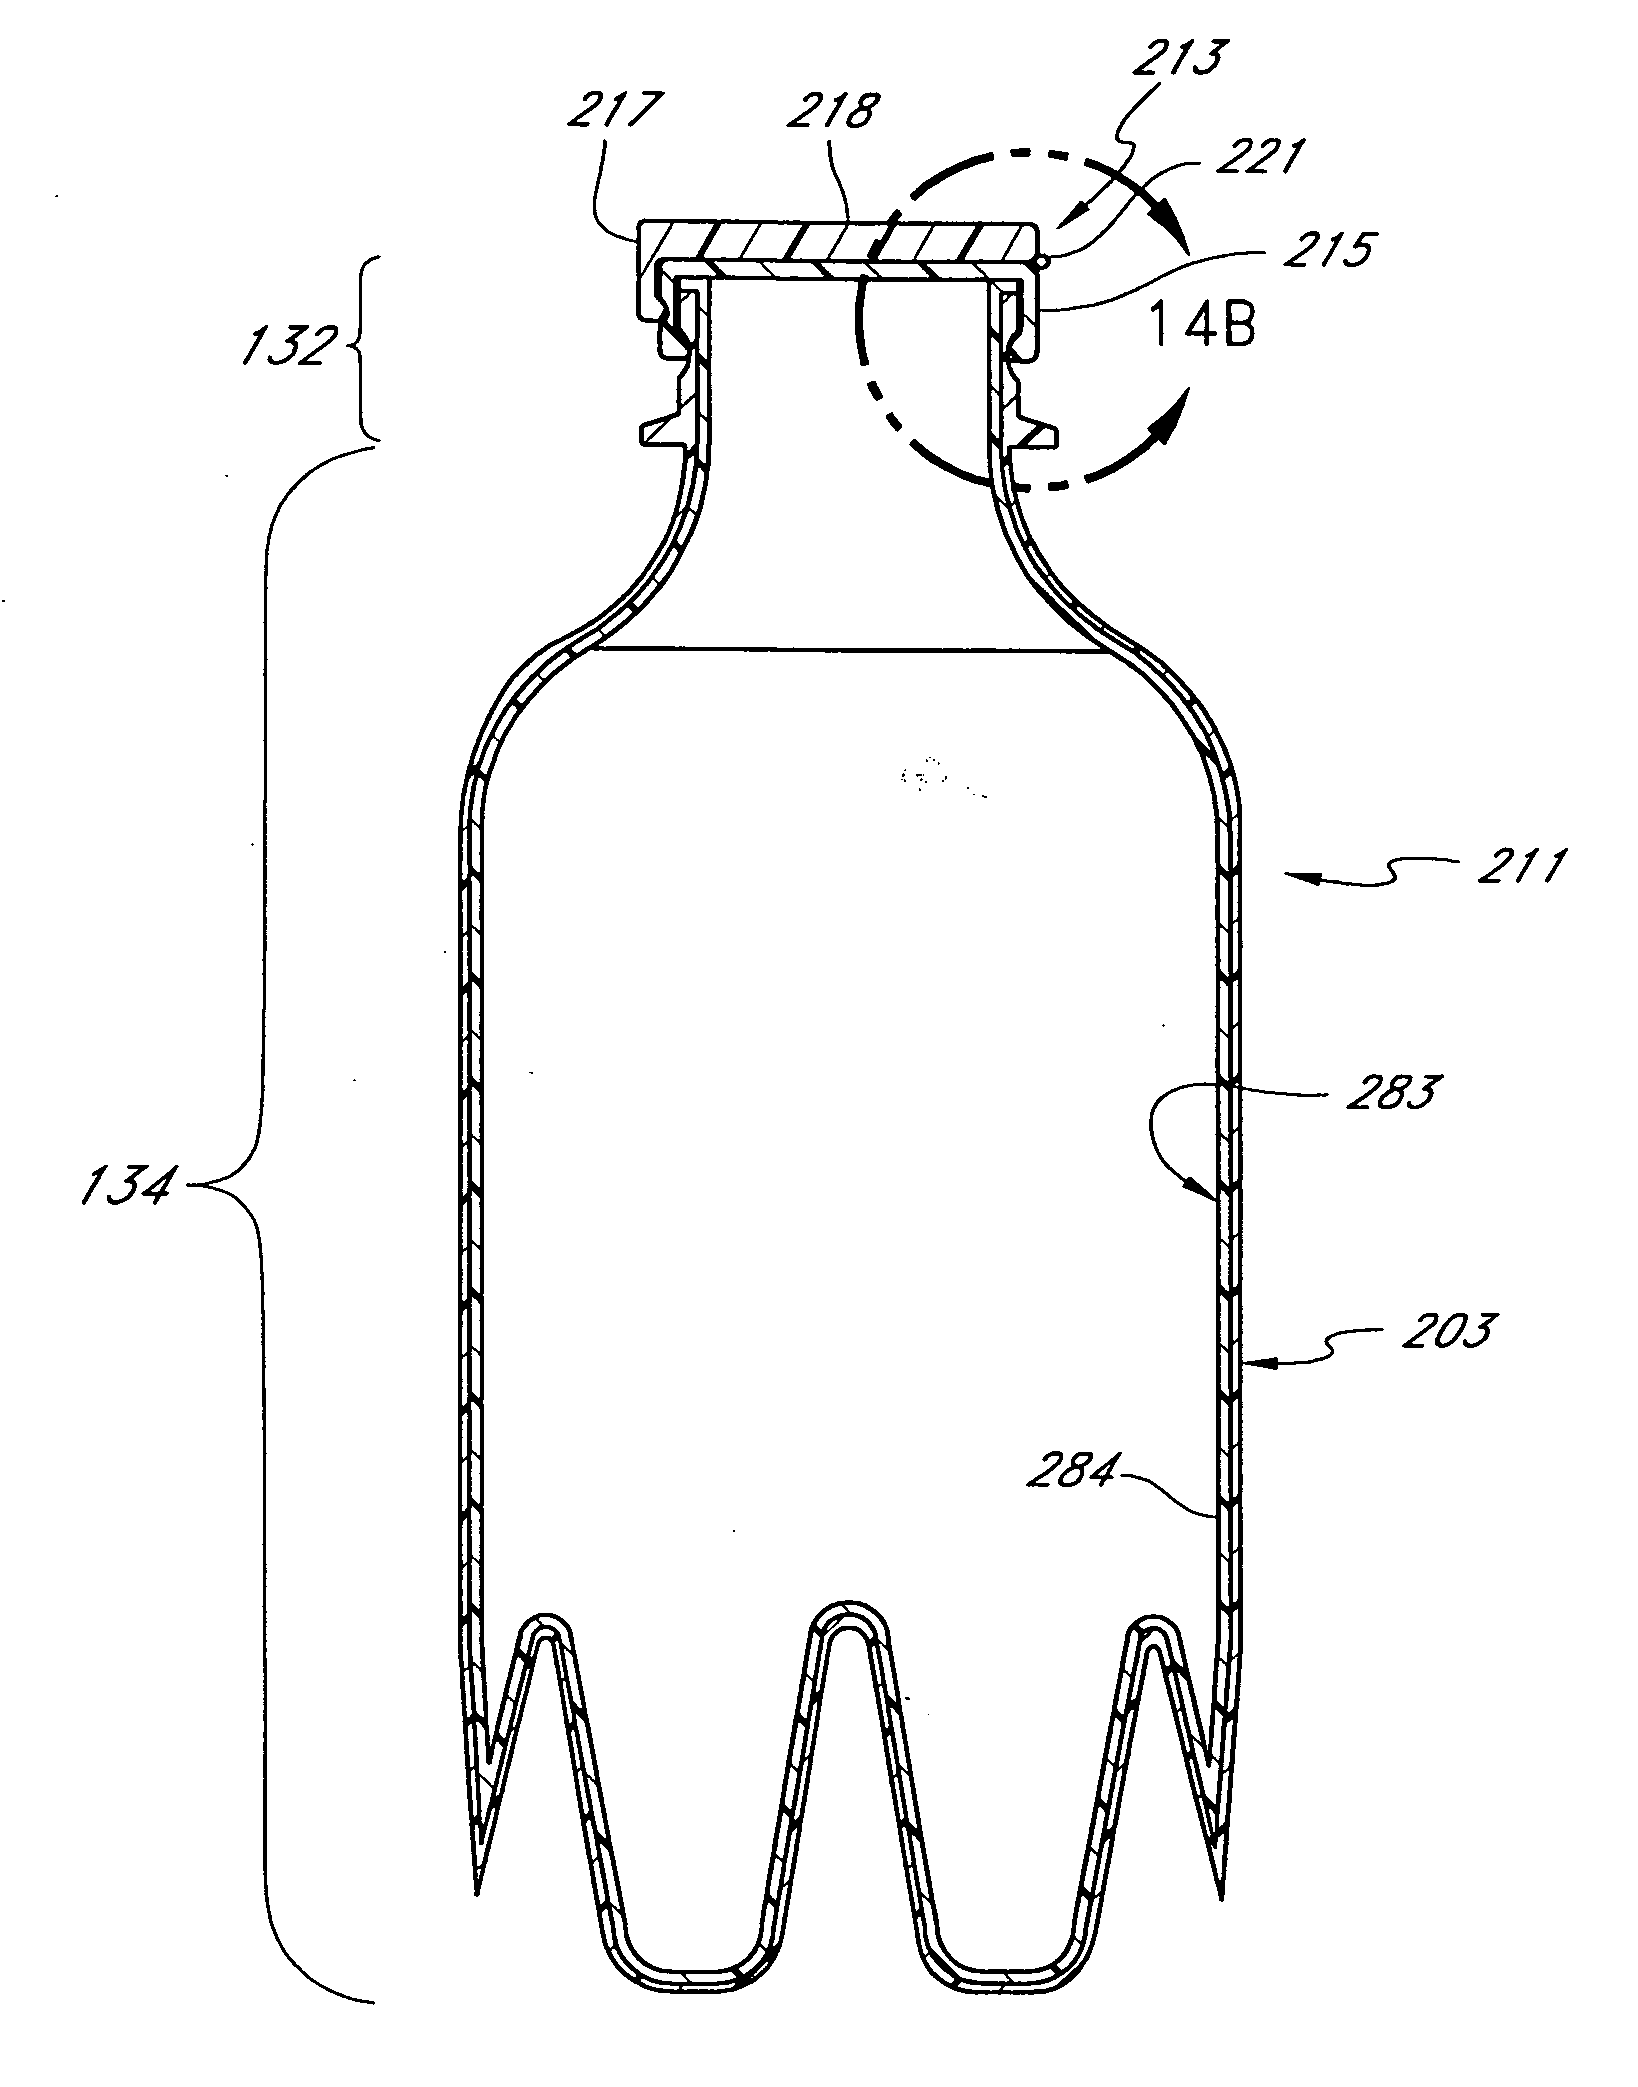 Mono and multi-layer articles and extrusion methods of making the same